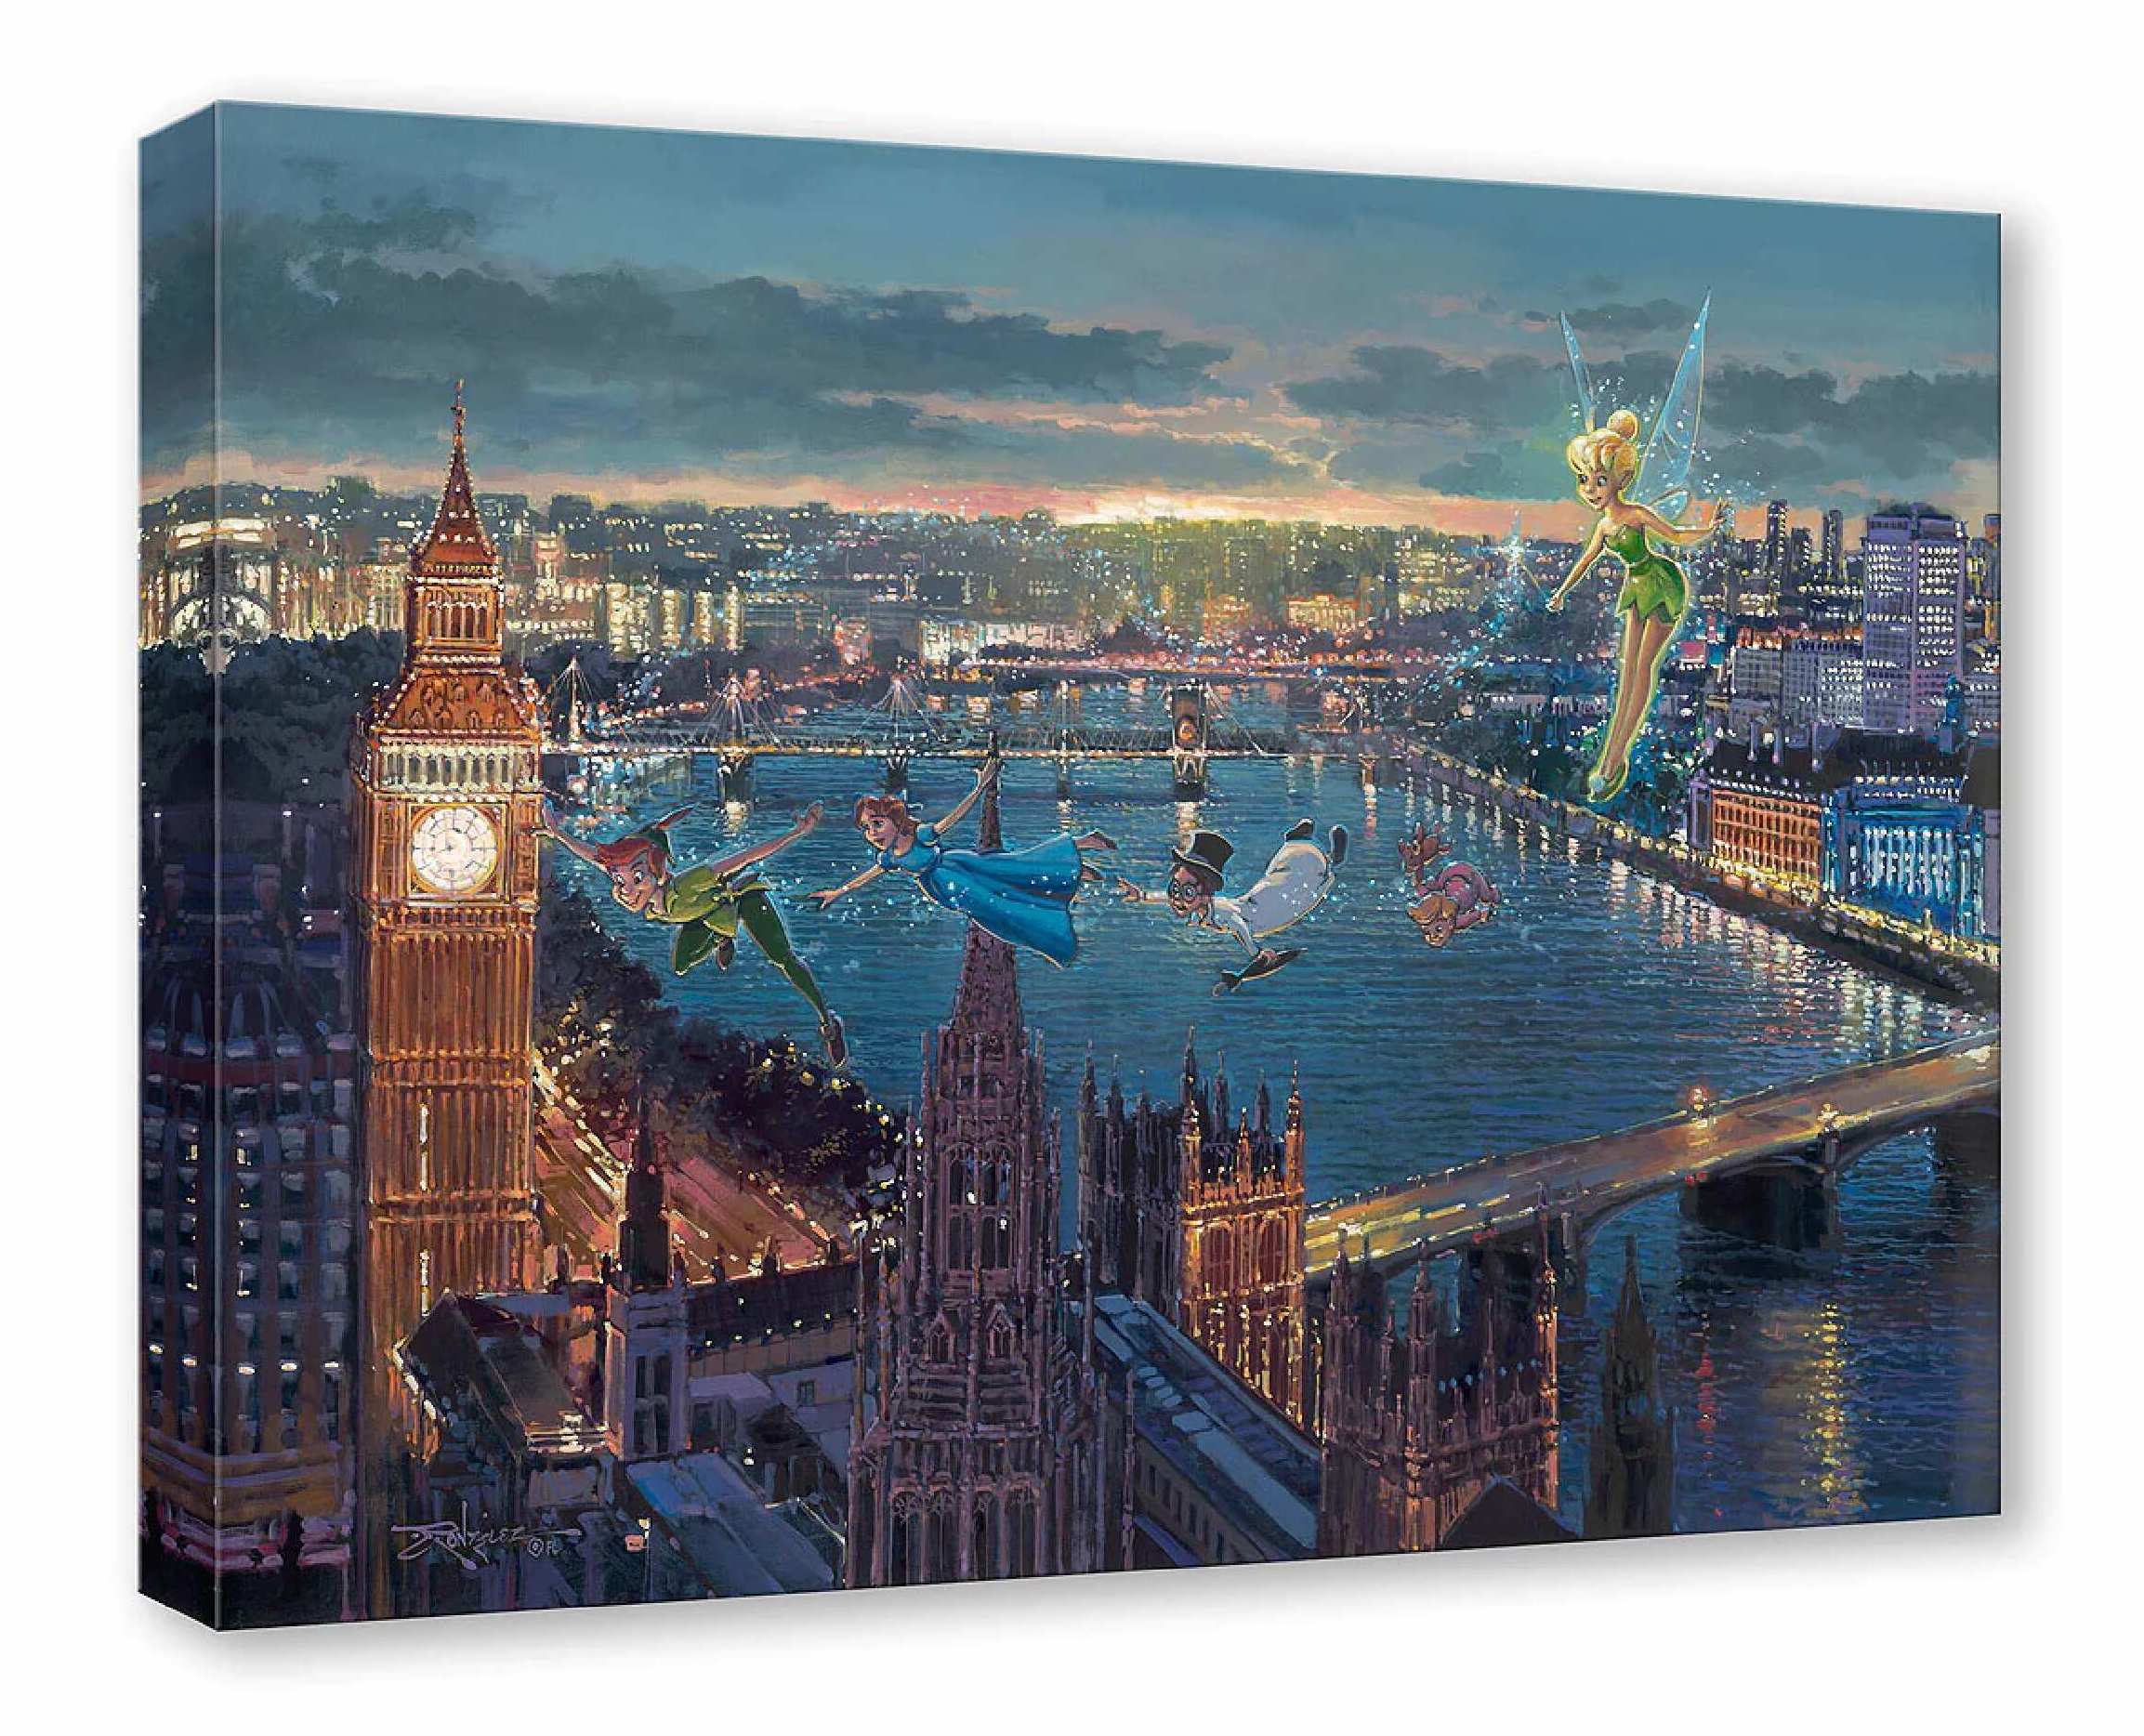 Peter Pan, Wendy, Tinker Bell, and the children as they soar over the rooftops of London Gallery Wrapped Canvas